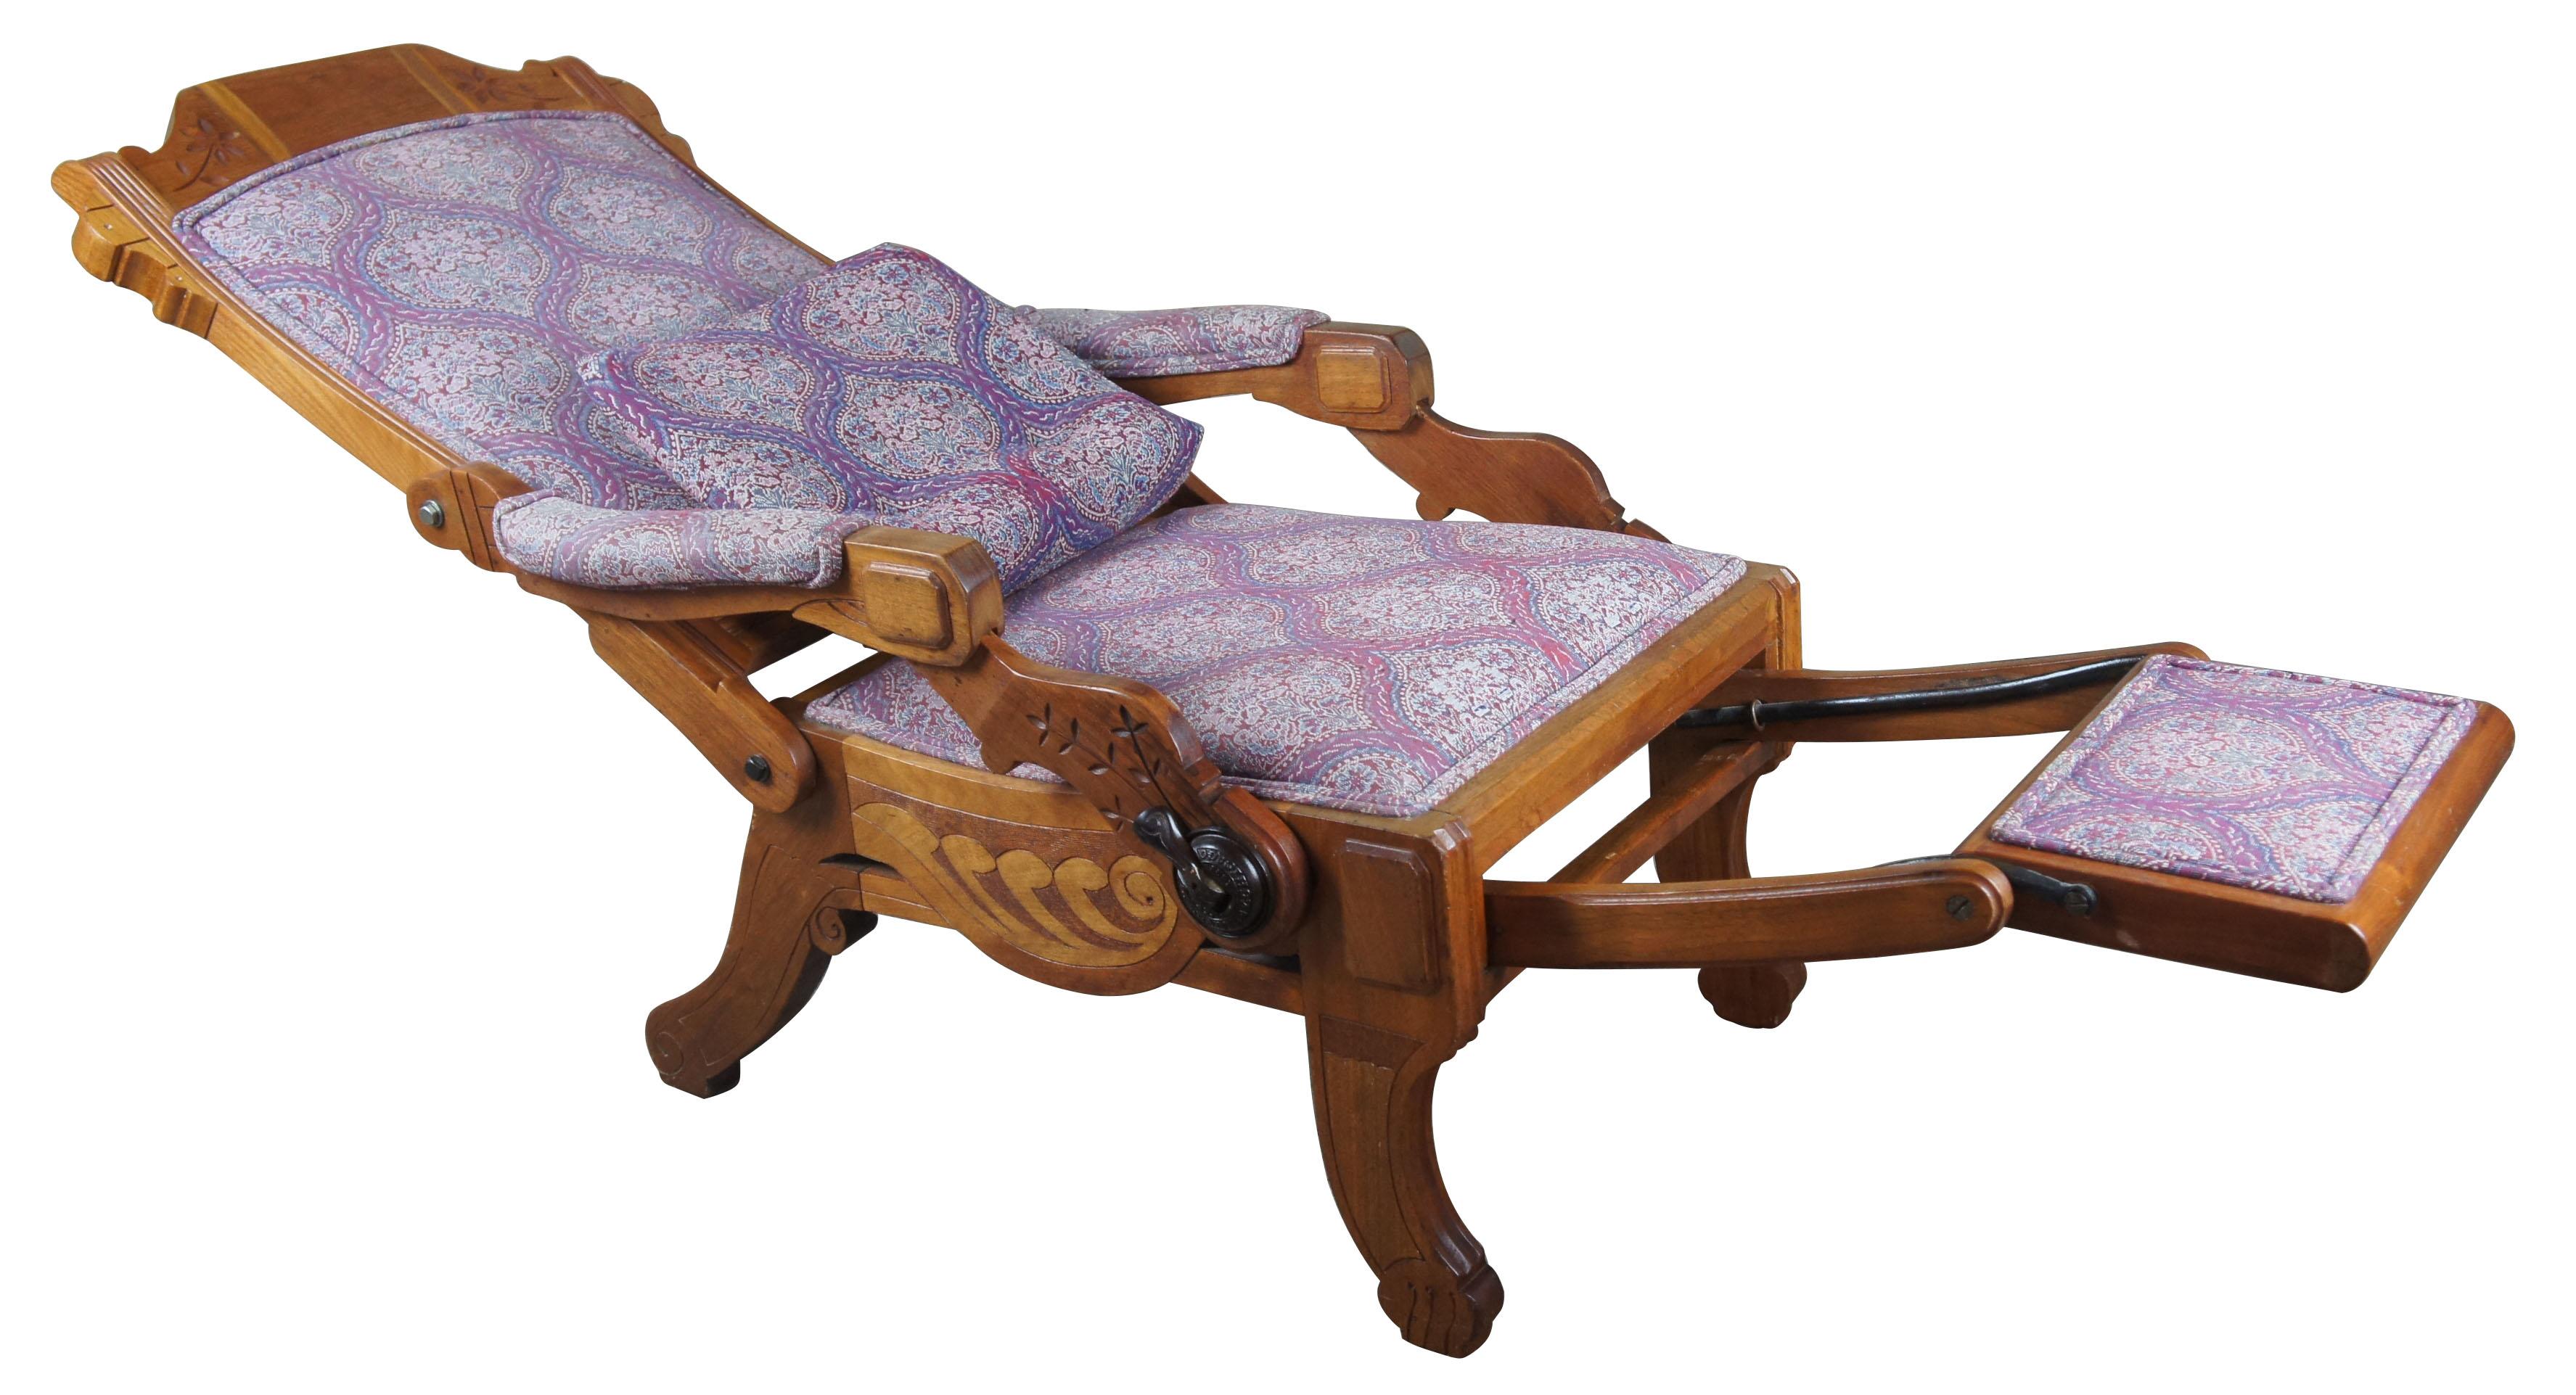 An American late 19th century walnut reclining armchair by the Hartley Reclining Chair Company of Chicago. Features carved and incised floral decorated frame with adjustable reclining back and pull-out footrest operated by a brass and steel